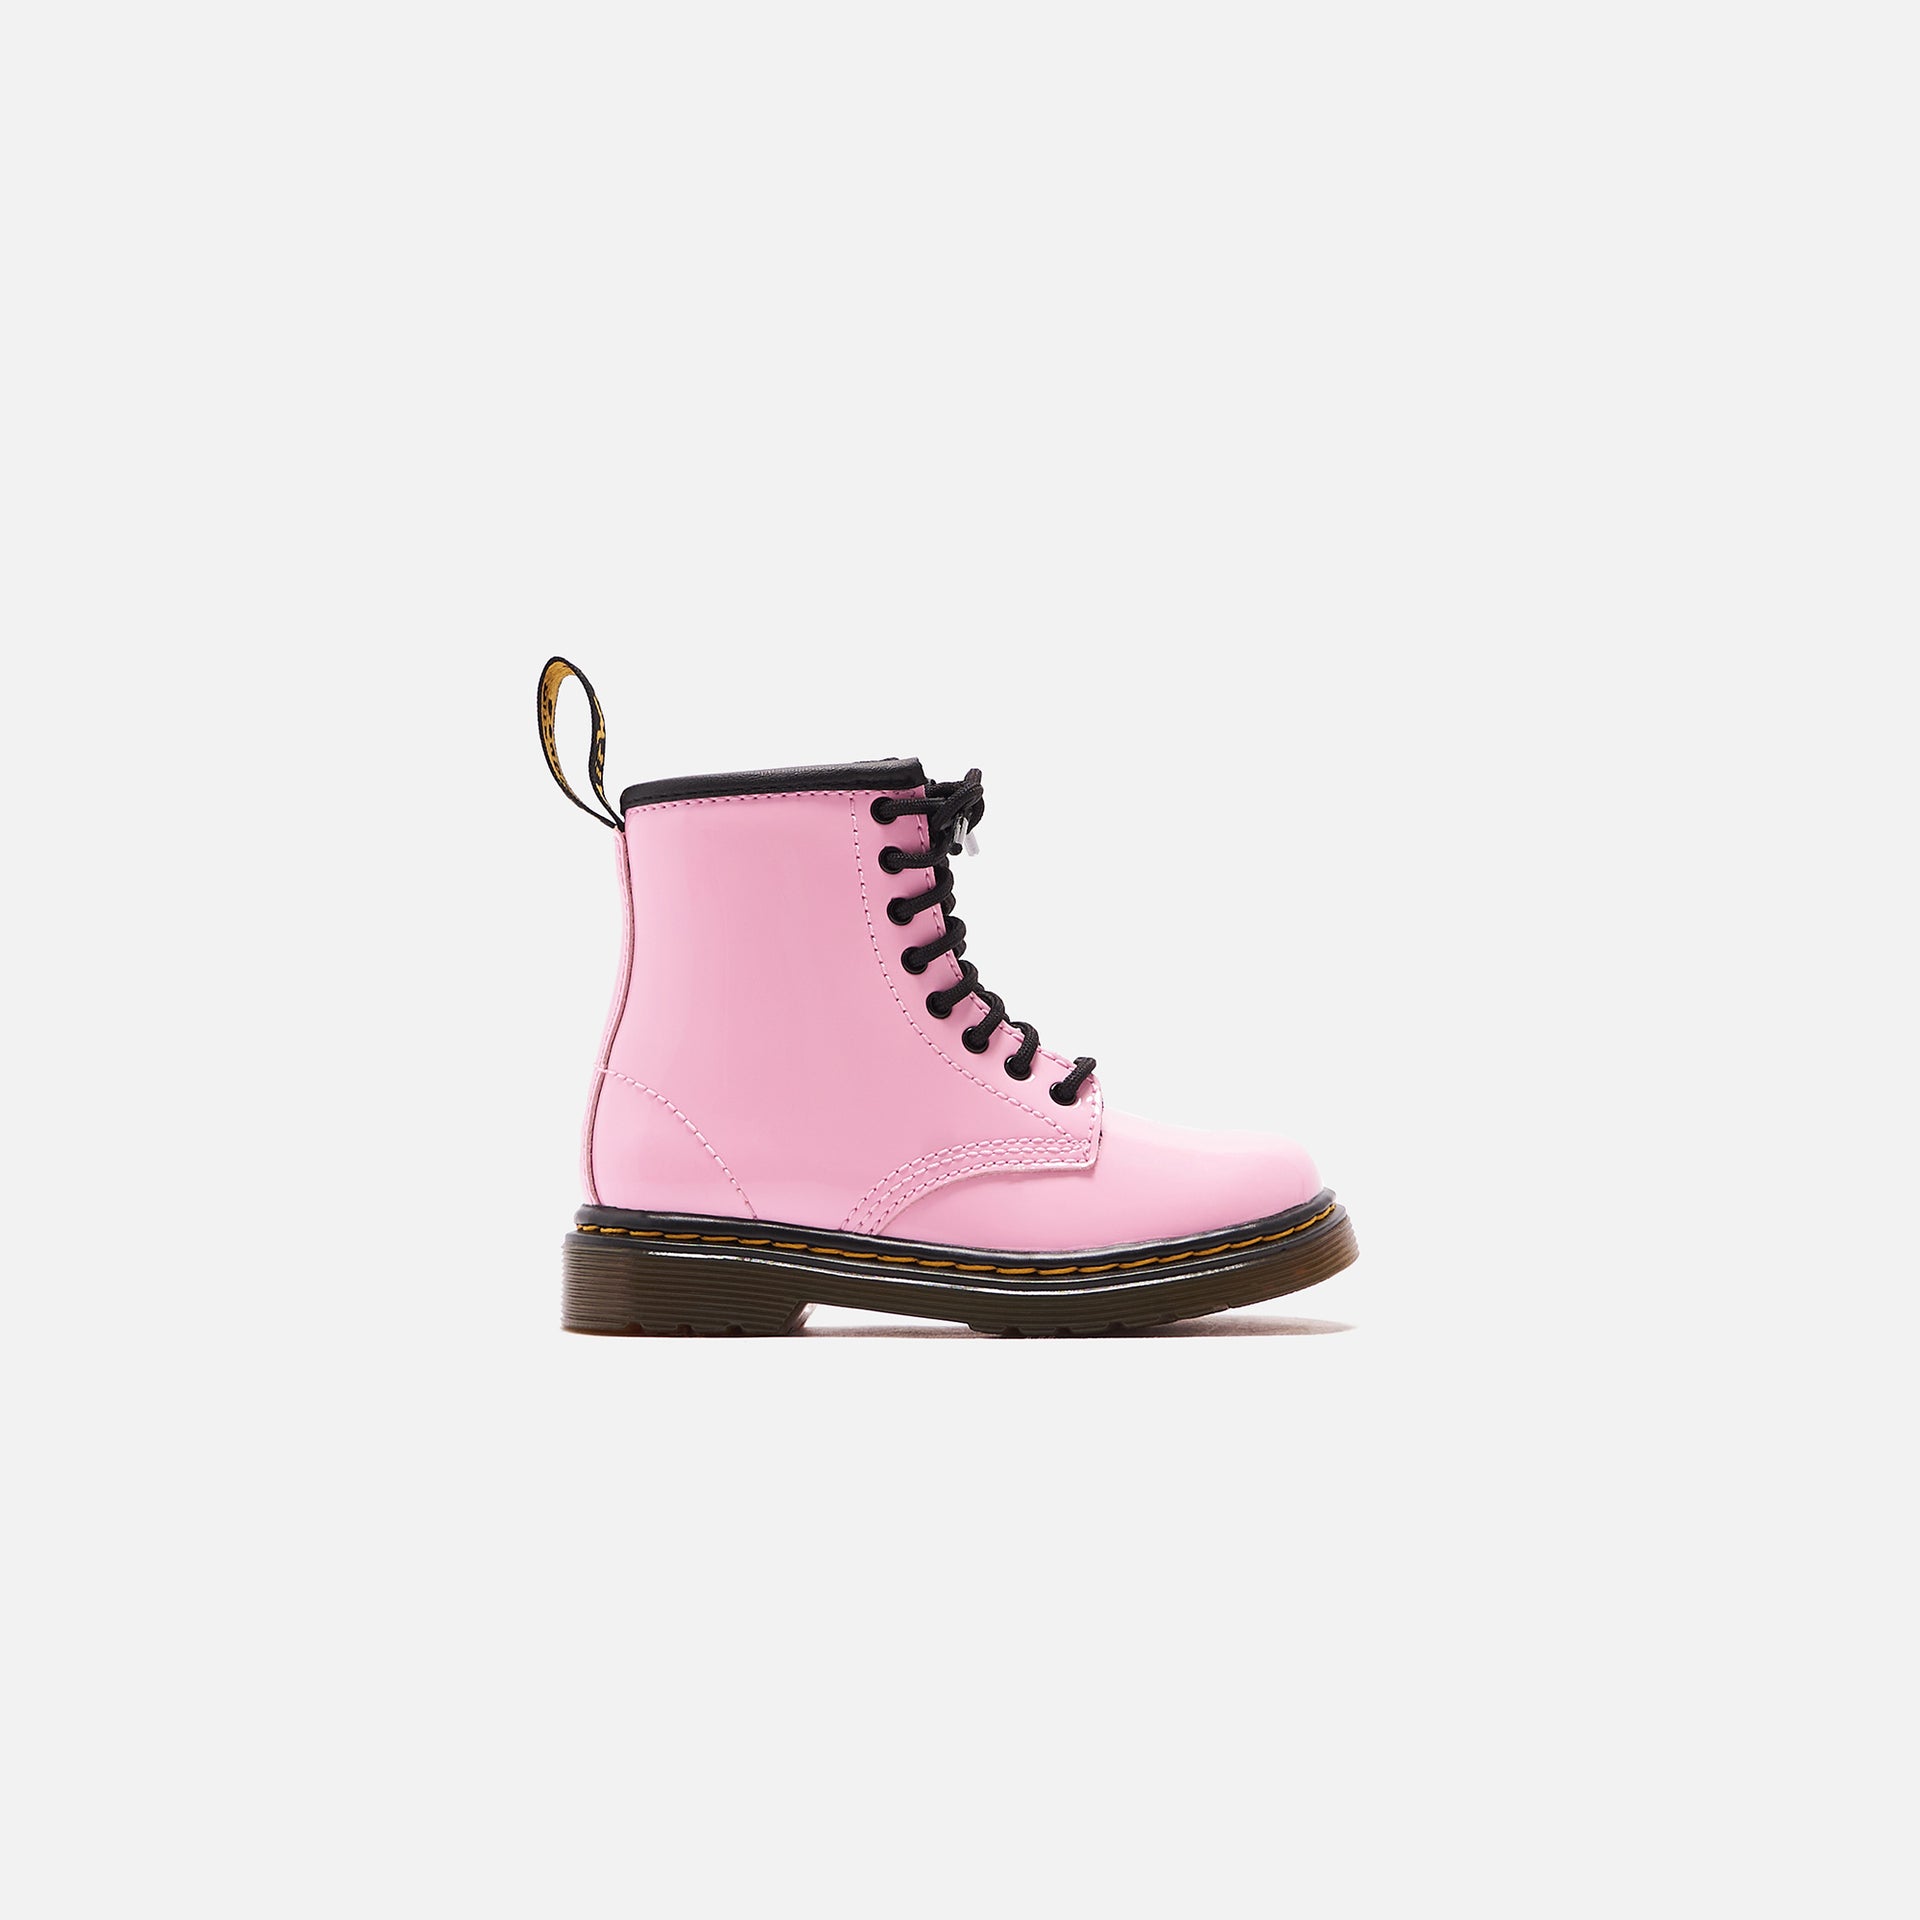 Dr. clothing Martens Infant 1460 Patent Leather - Pale Pink